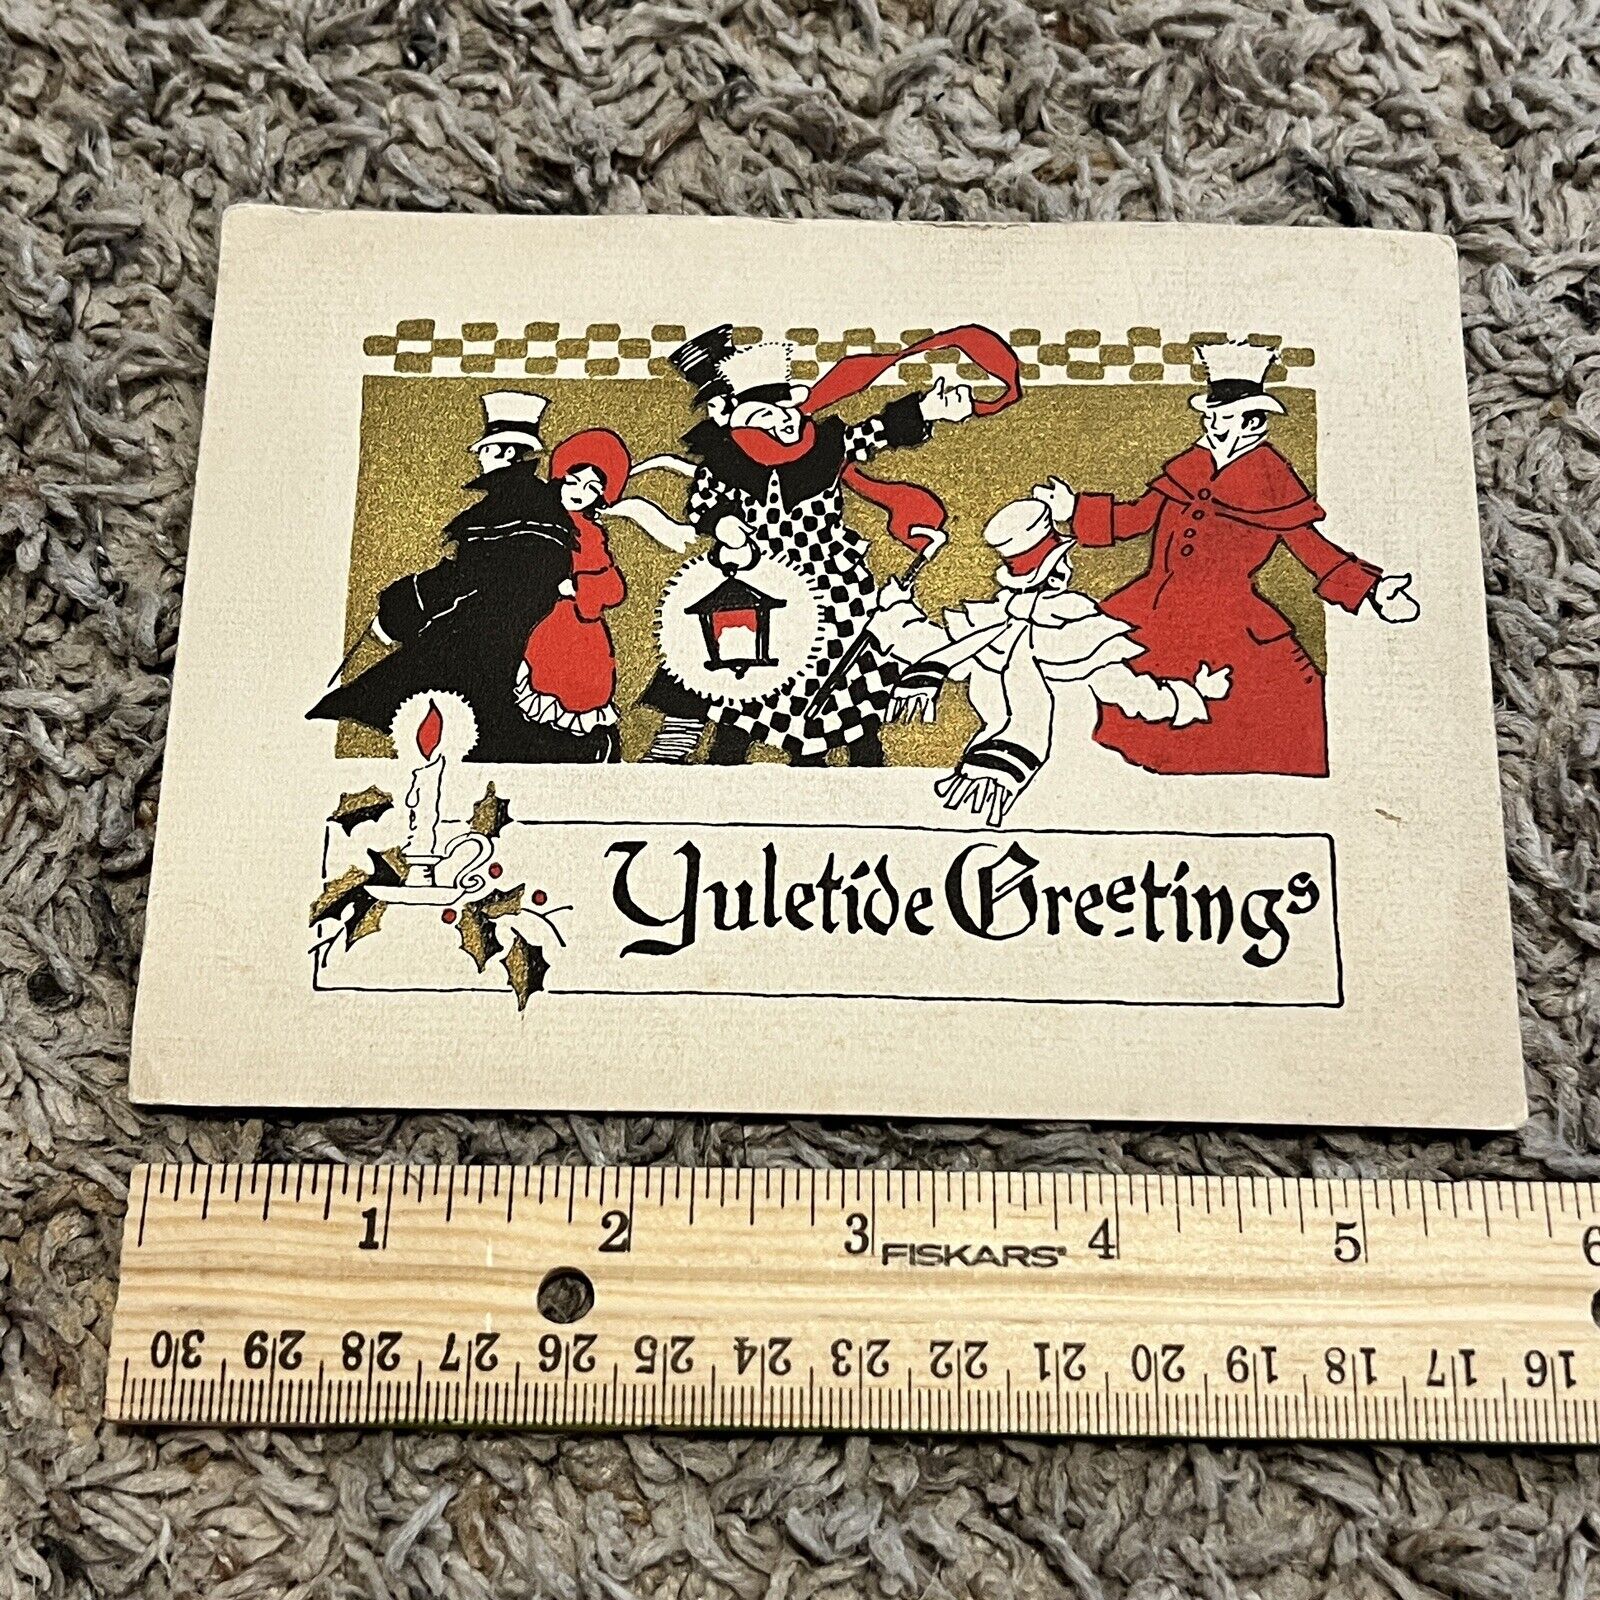 INTERESTING EARLY CHRISTMAS YULETIDE GREETINGS CARD (ONE SIDE)